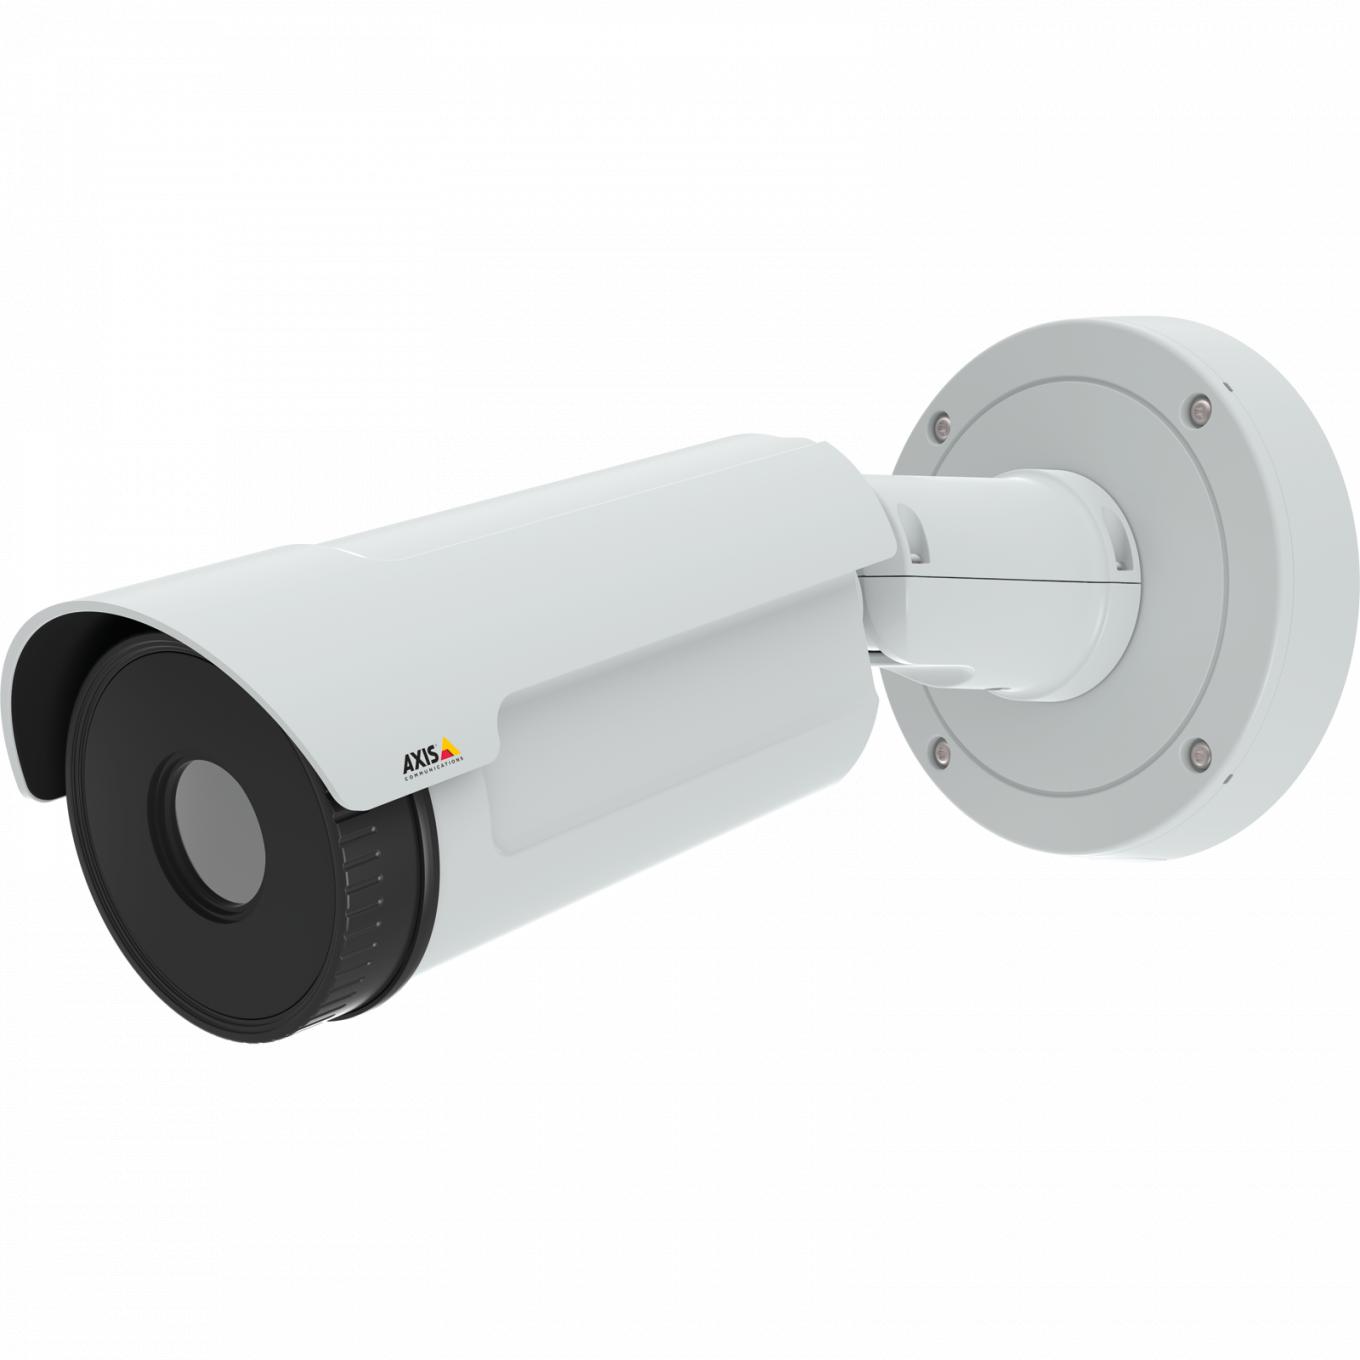 AXIS Q1942-E Thermal Network Camera | Axis Communications